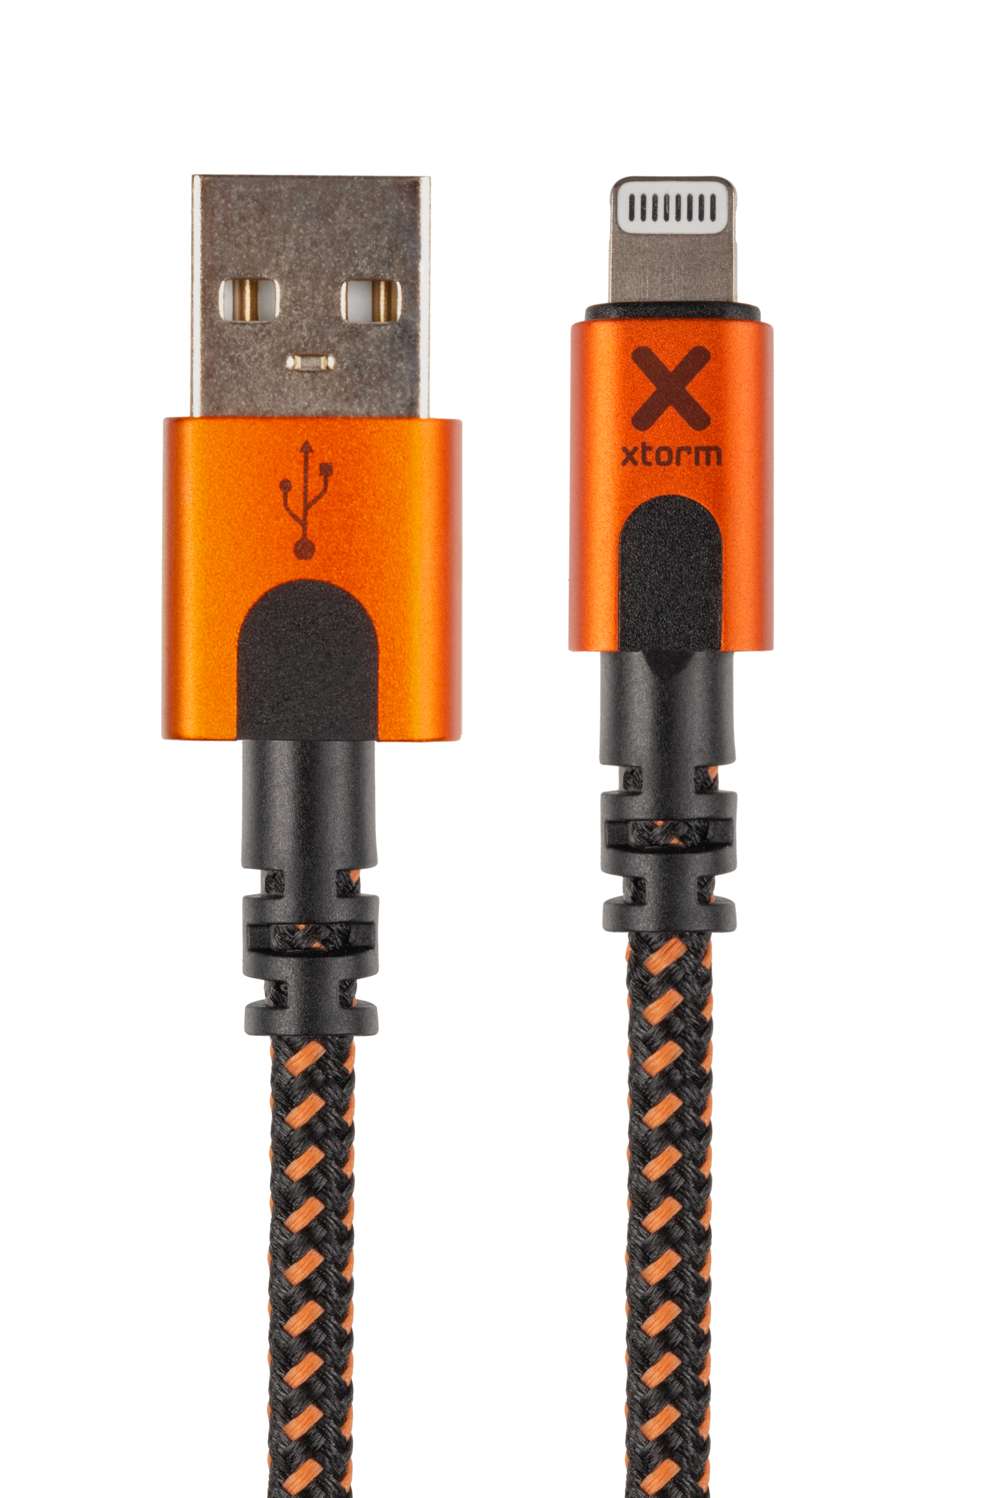 Xtreme USB to Lightning Cable - 1.5 meter - Xtorm NL